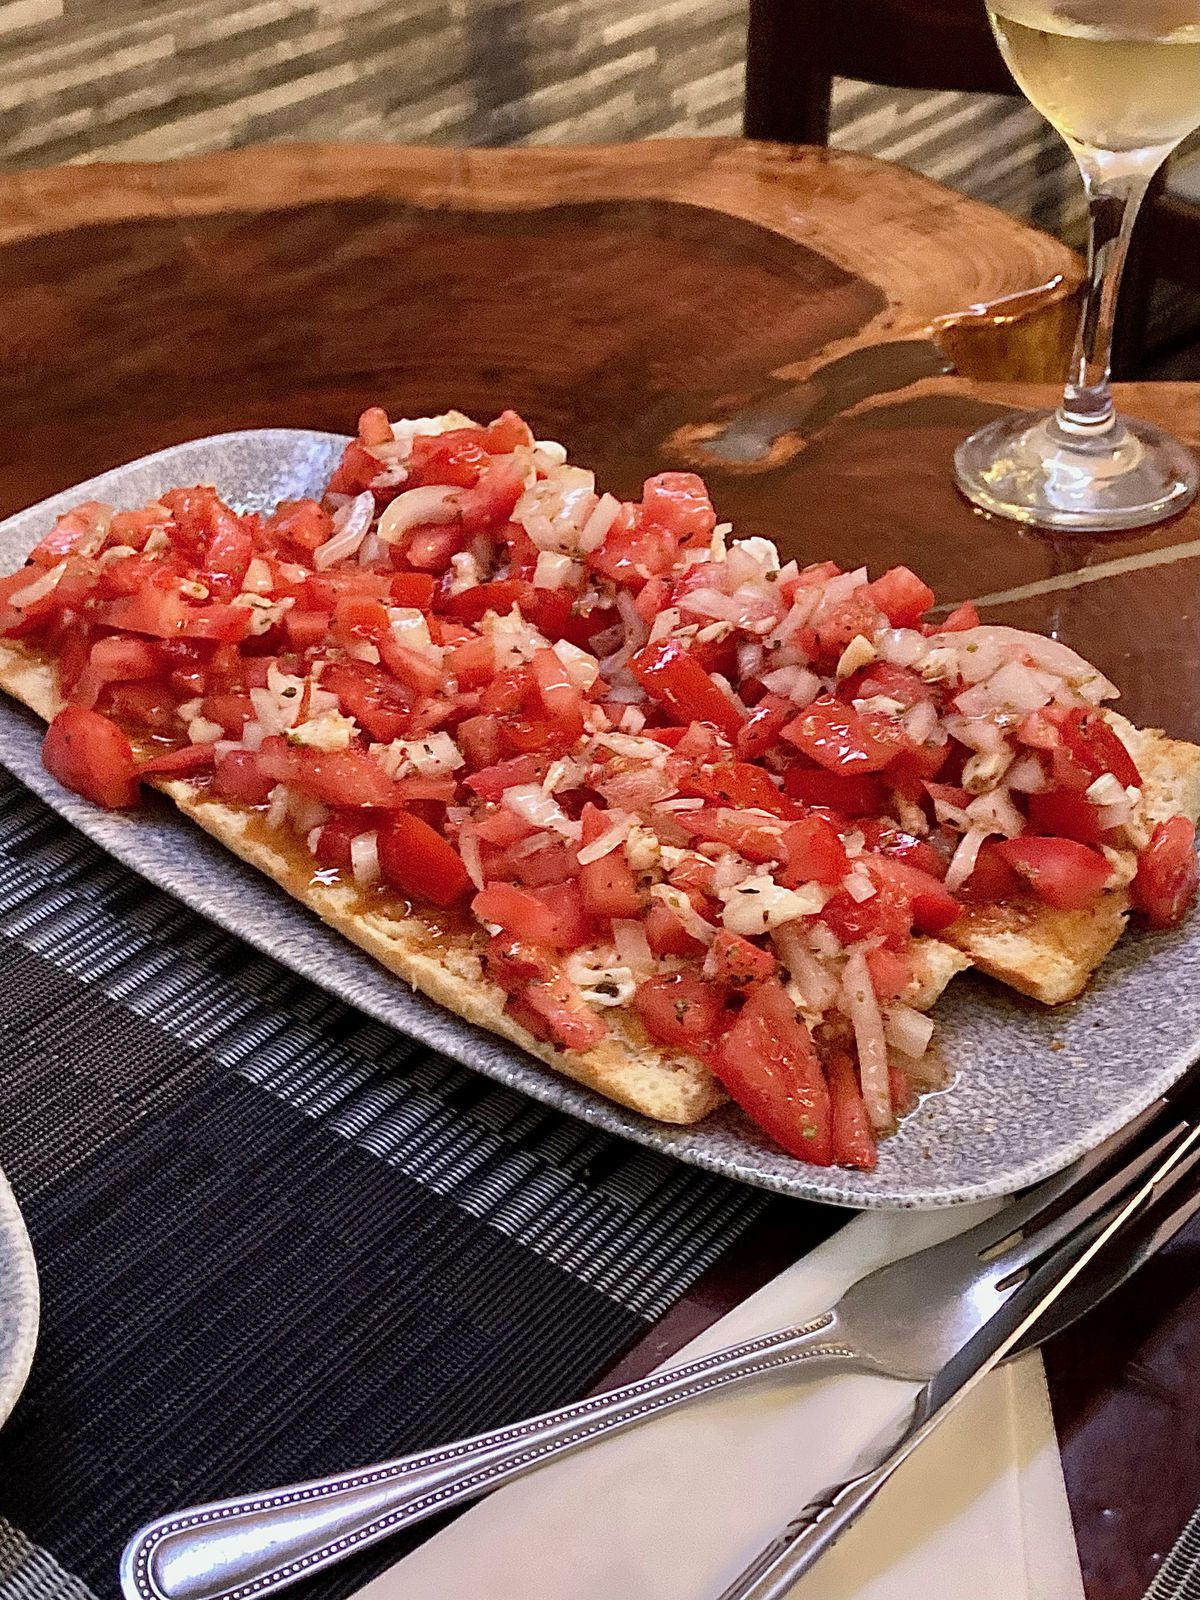 A platter of bruschetta with a glass of white wine in the background.